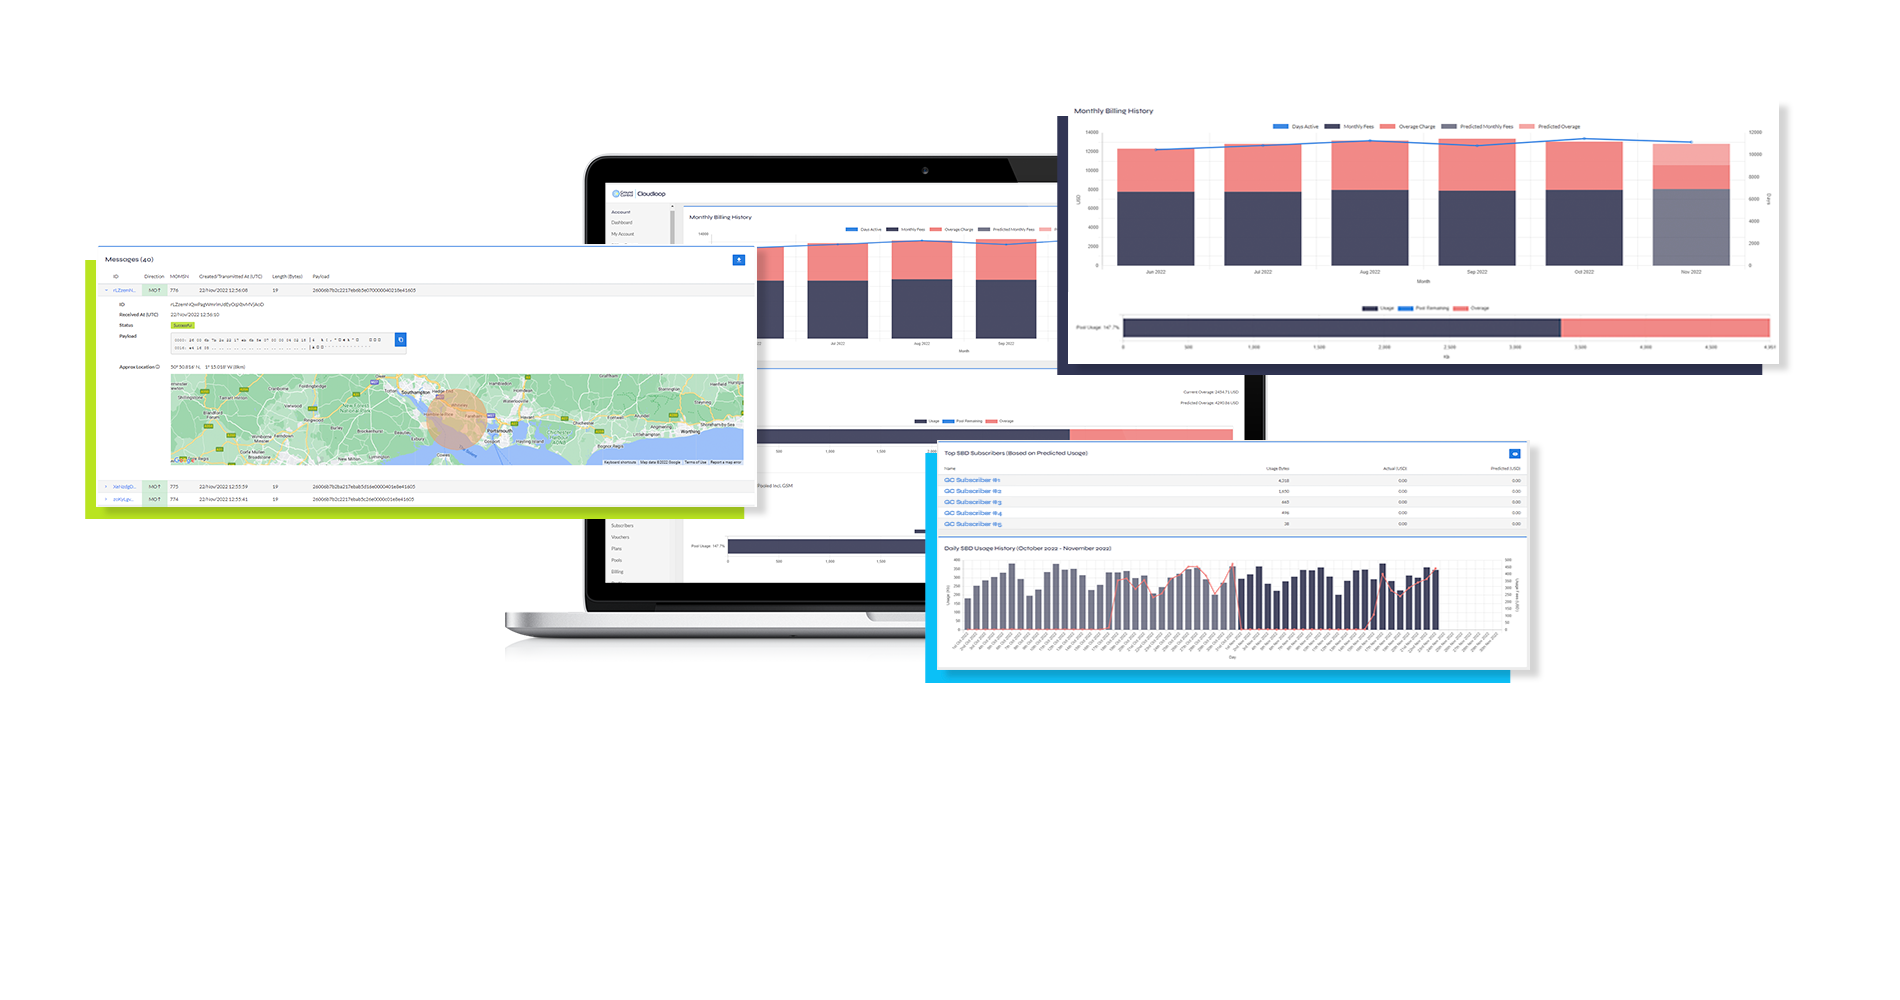 Cloudloop features: Developer friendly, Confidently manage usage and control costs, Manage all of your devices in one place, Secure by design